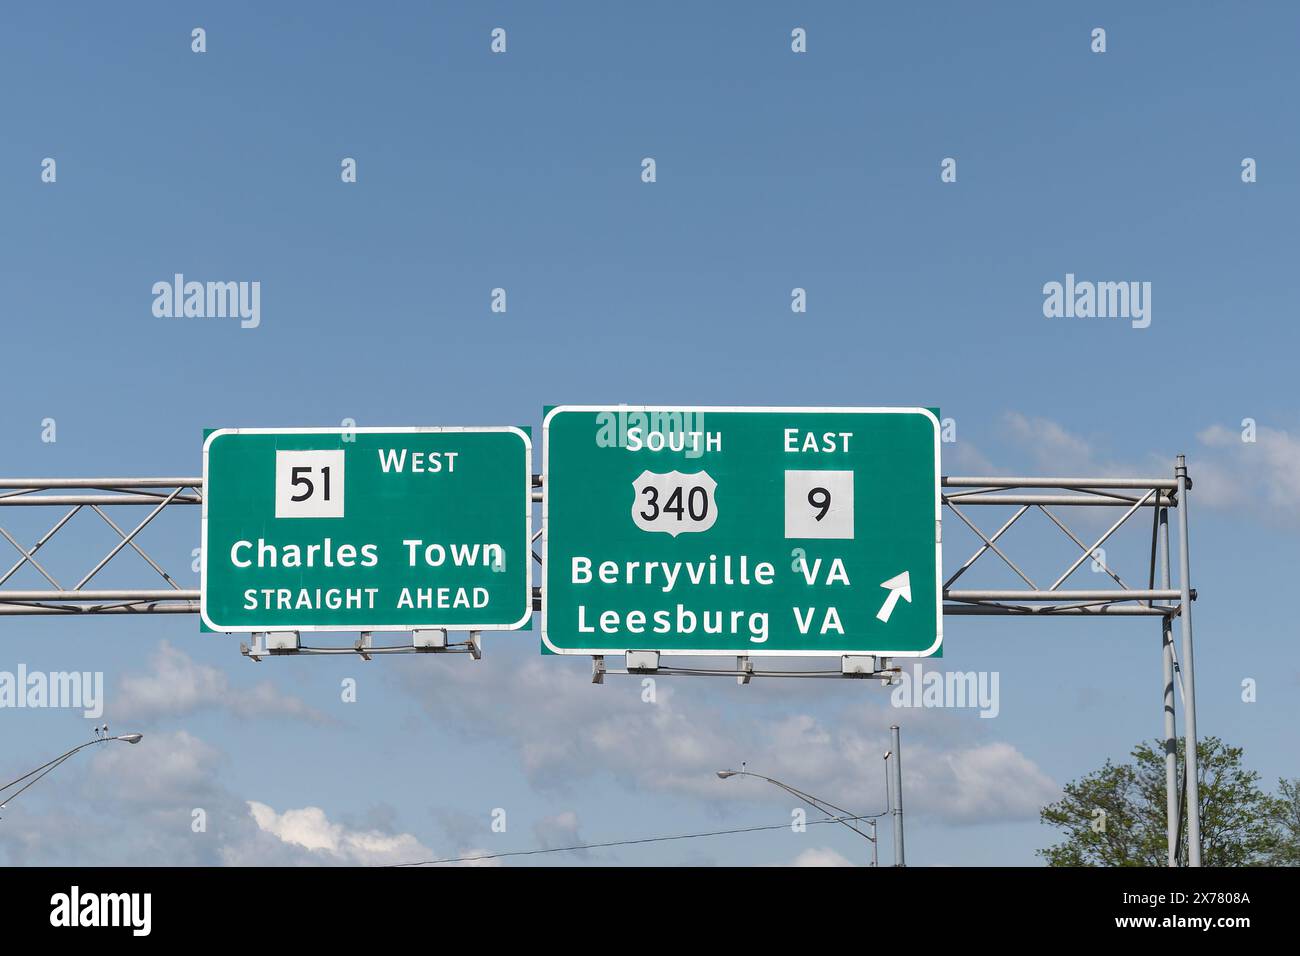 exit sign in Charles Town, West Virginia for WV-51 West toward Charles Town,  US-340 South and WV-9 toward Berryville, Virginia and Leesburg, Virginia Stock Photo